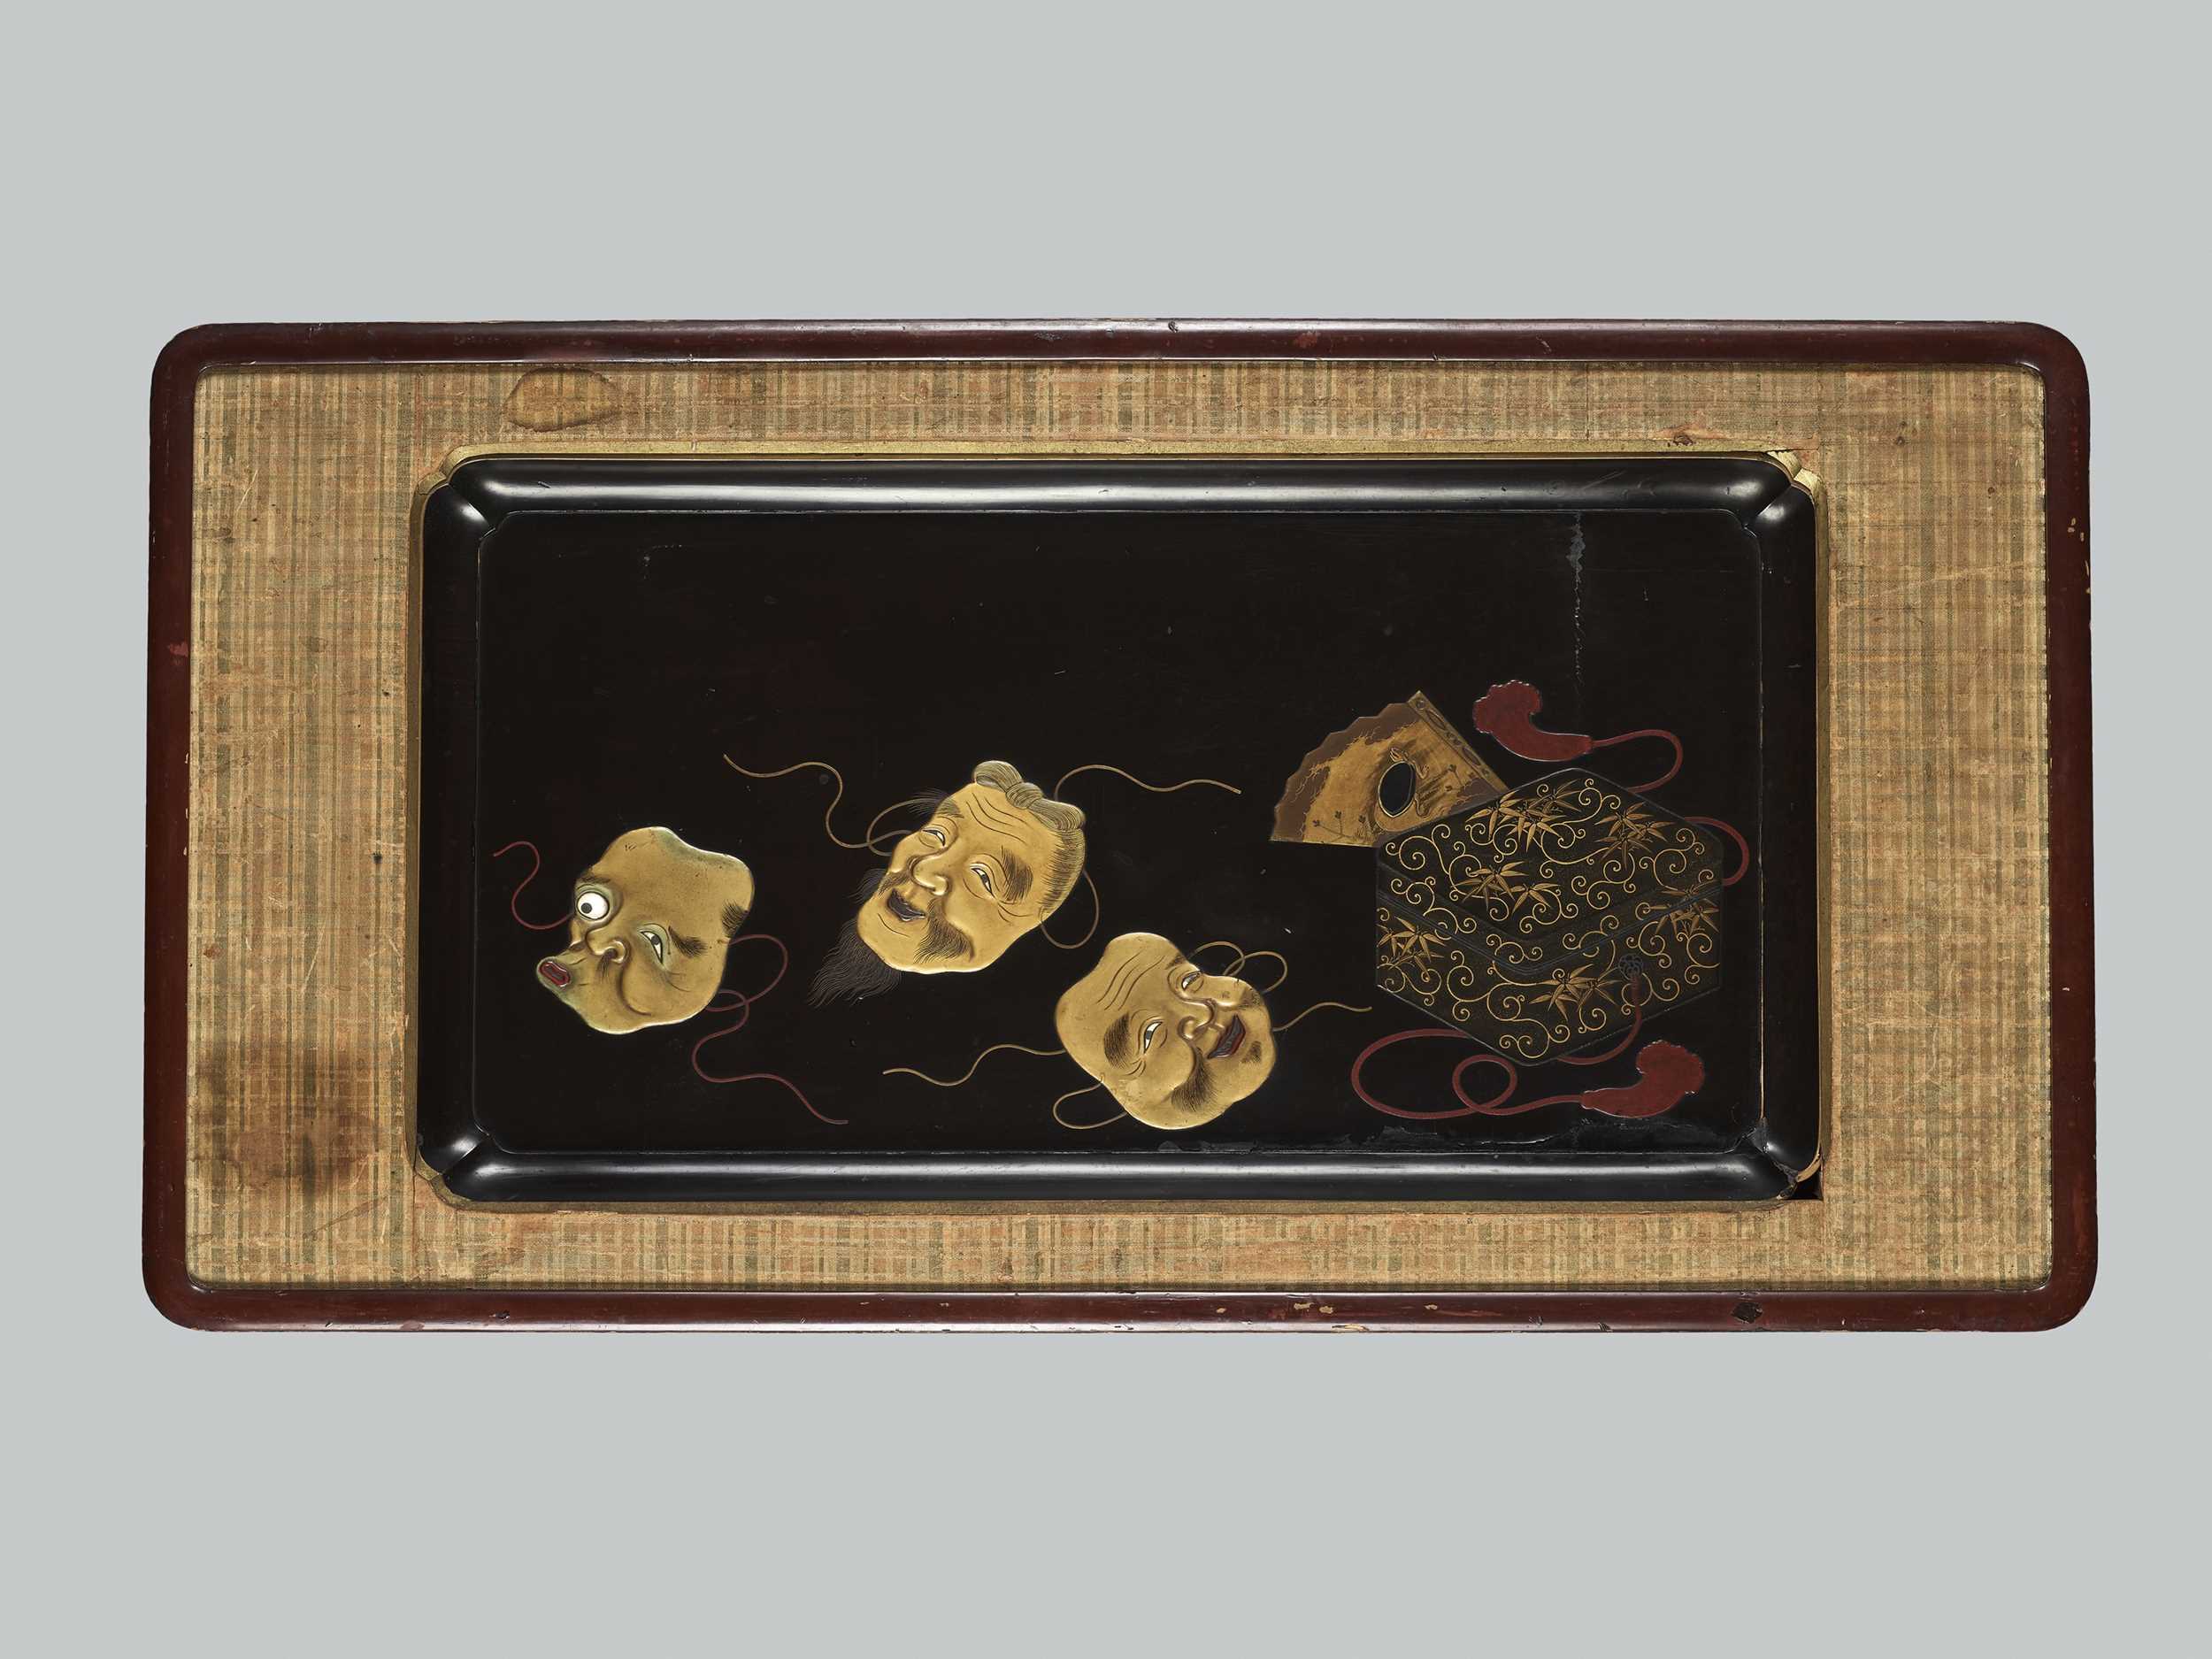 Lot 206 - A LARGE LACQUER TRAY MOUNTED AS A WALL PANEL